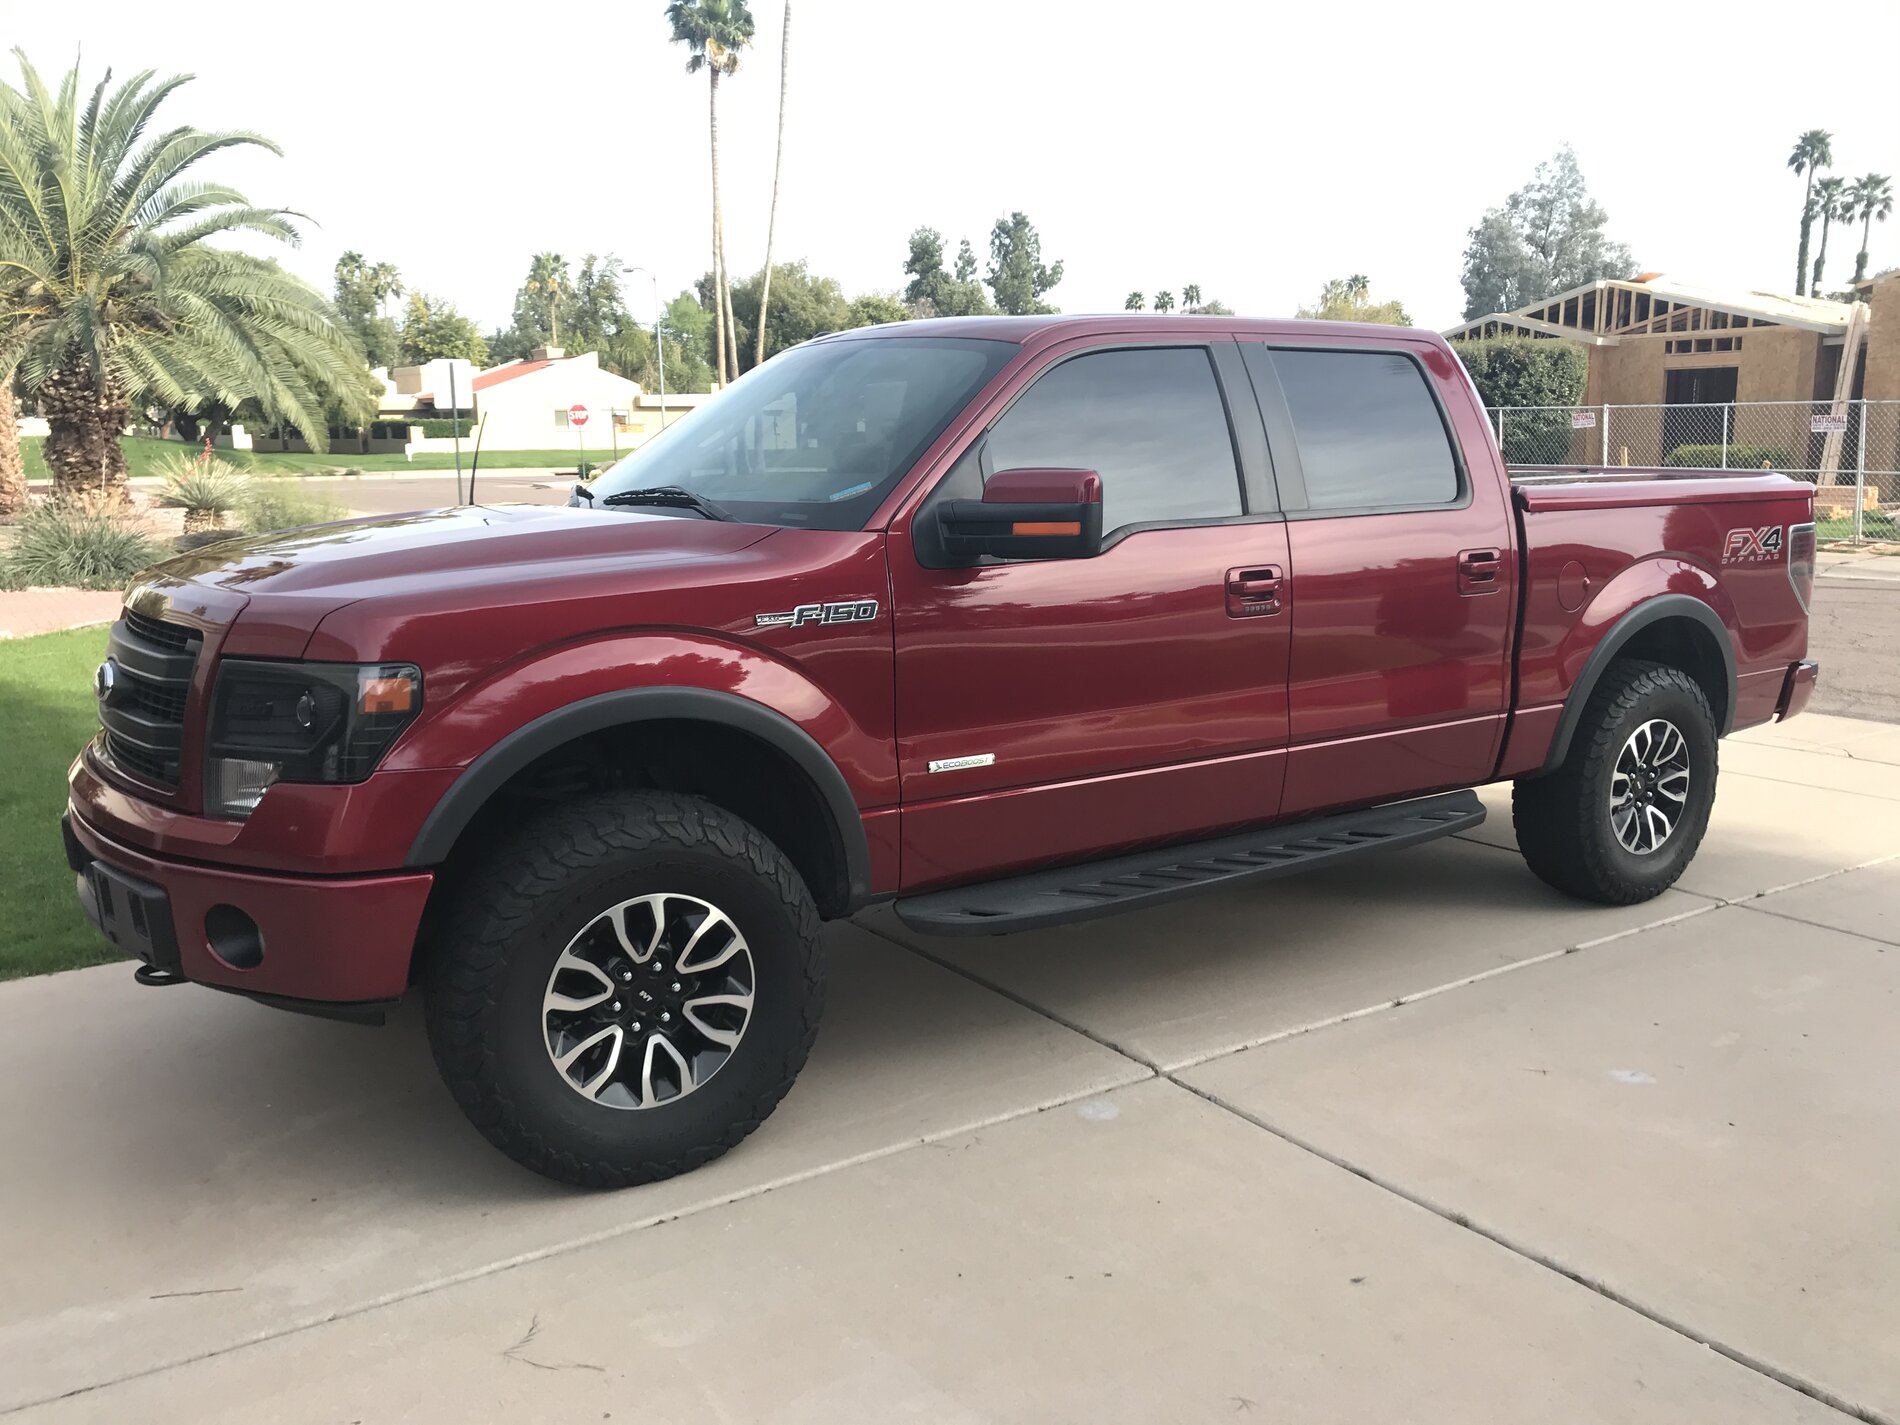 Ford F-150 Hope for us all. My truck finally arrived at the dealer today 47FD30F9-CAF4-4D22-A341-F2C17F9BA526